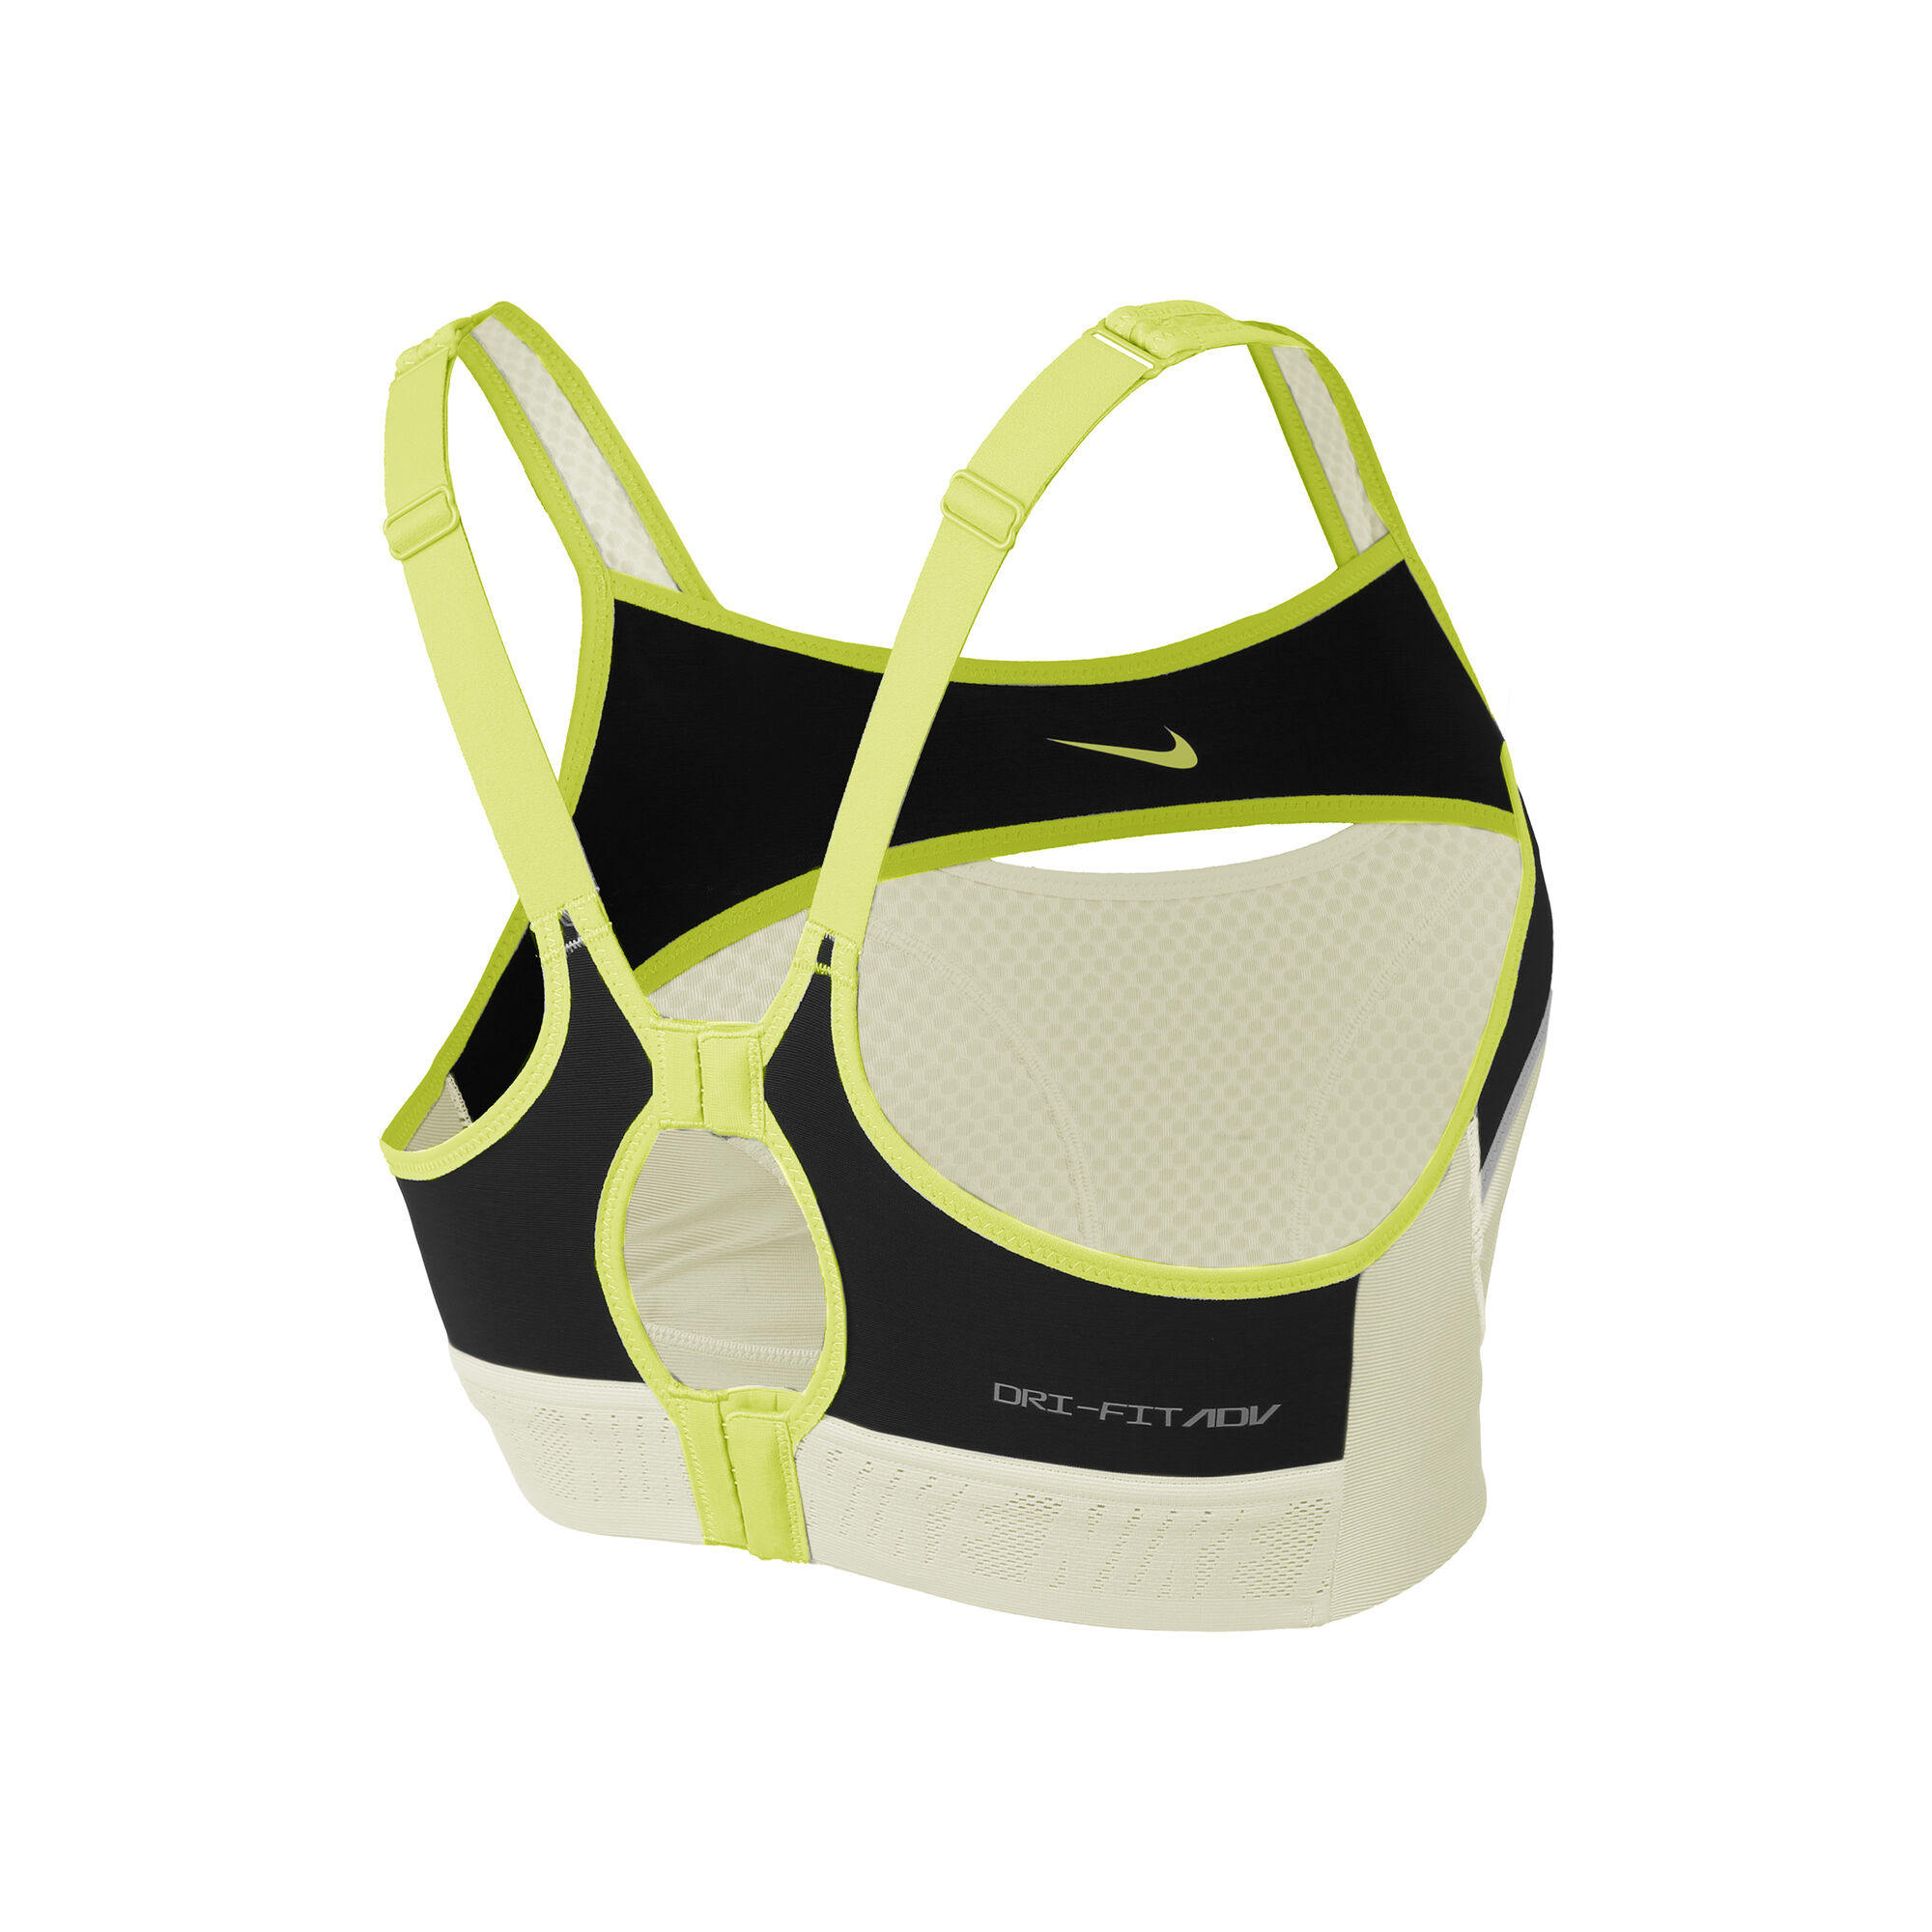 NIKE Alpha UltraBreathe Sports Bra Suppliers in Warangal - Sellers and  Traders - Justdial